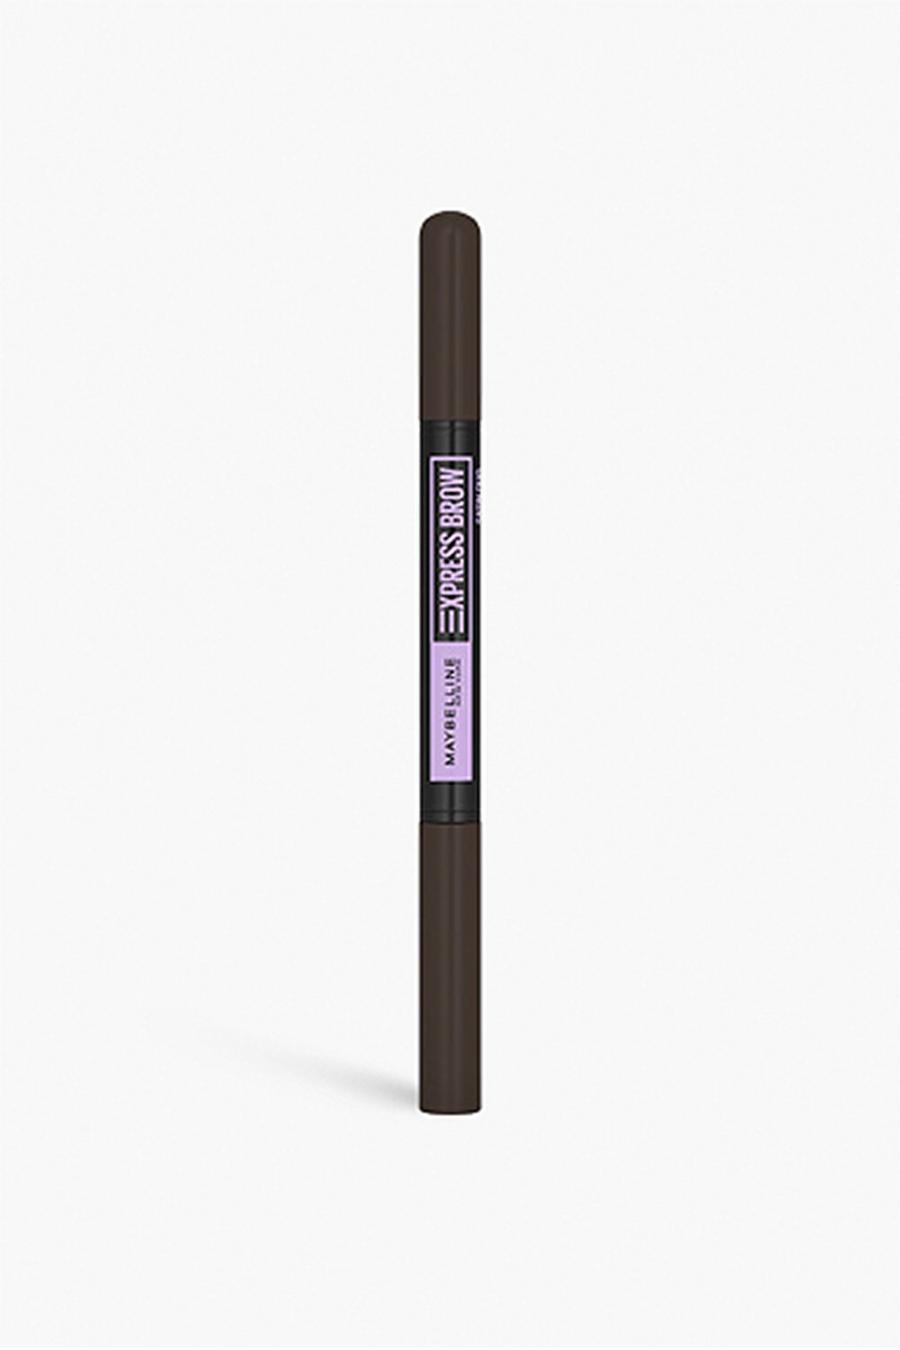 Express Brow Duo - rubio oscuro de Maybelline, 05 black brown image number 1